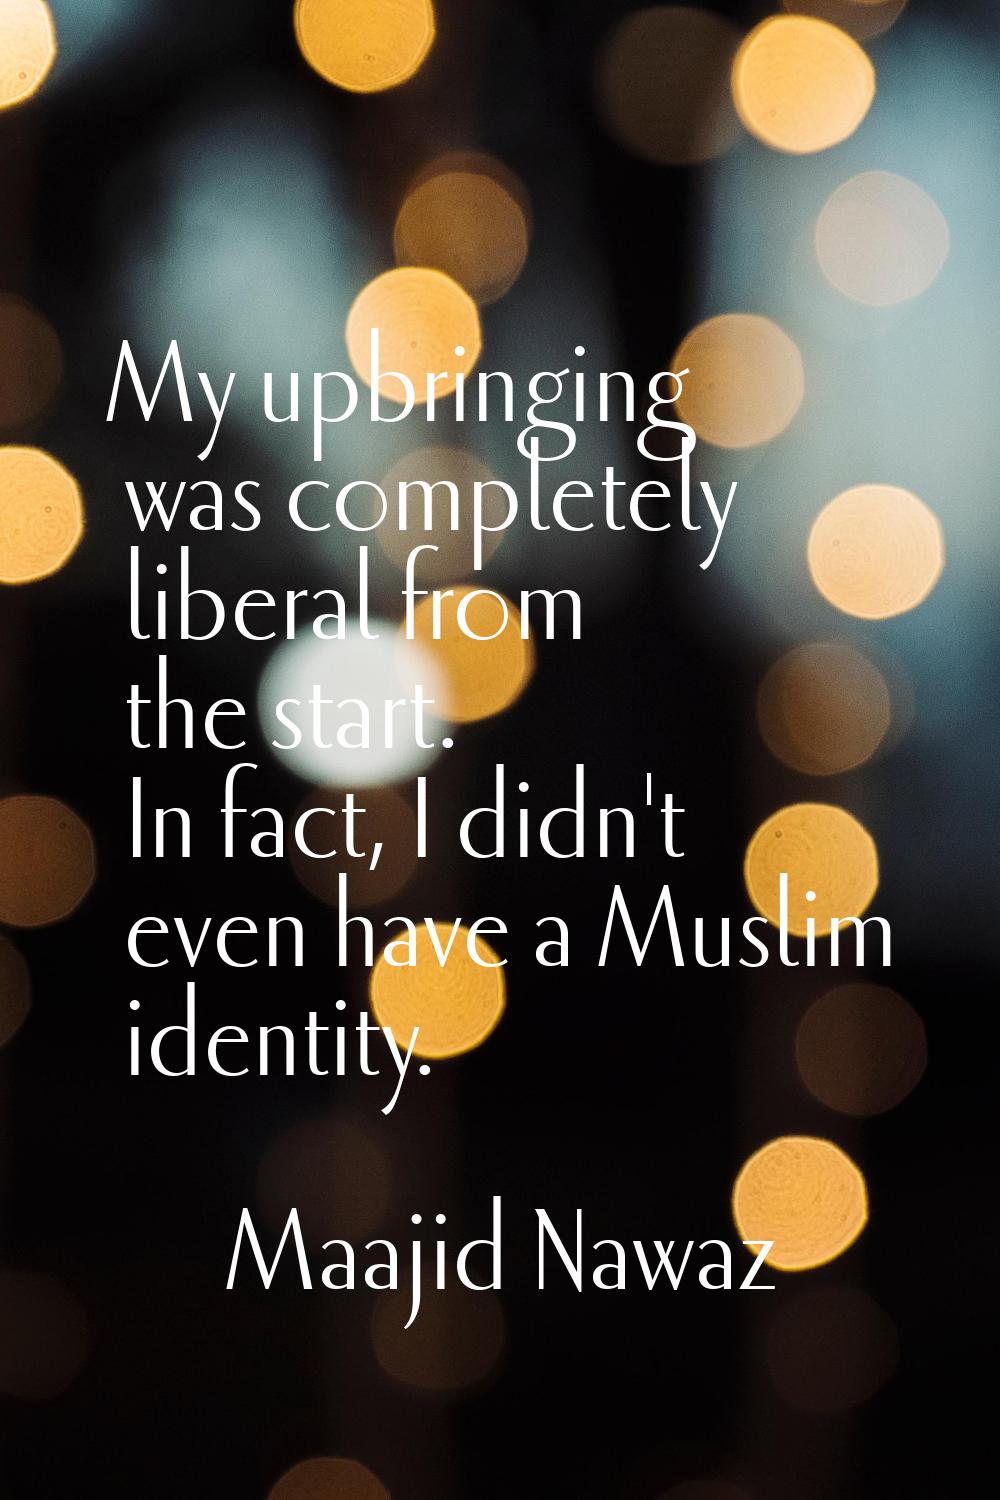 My upbringing was completely liberal from the start. In fact, I didn't even have a Muslim identity.